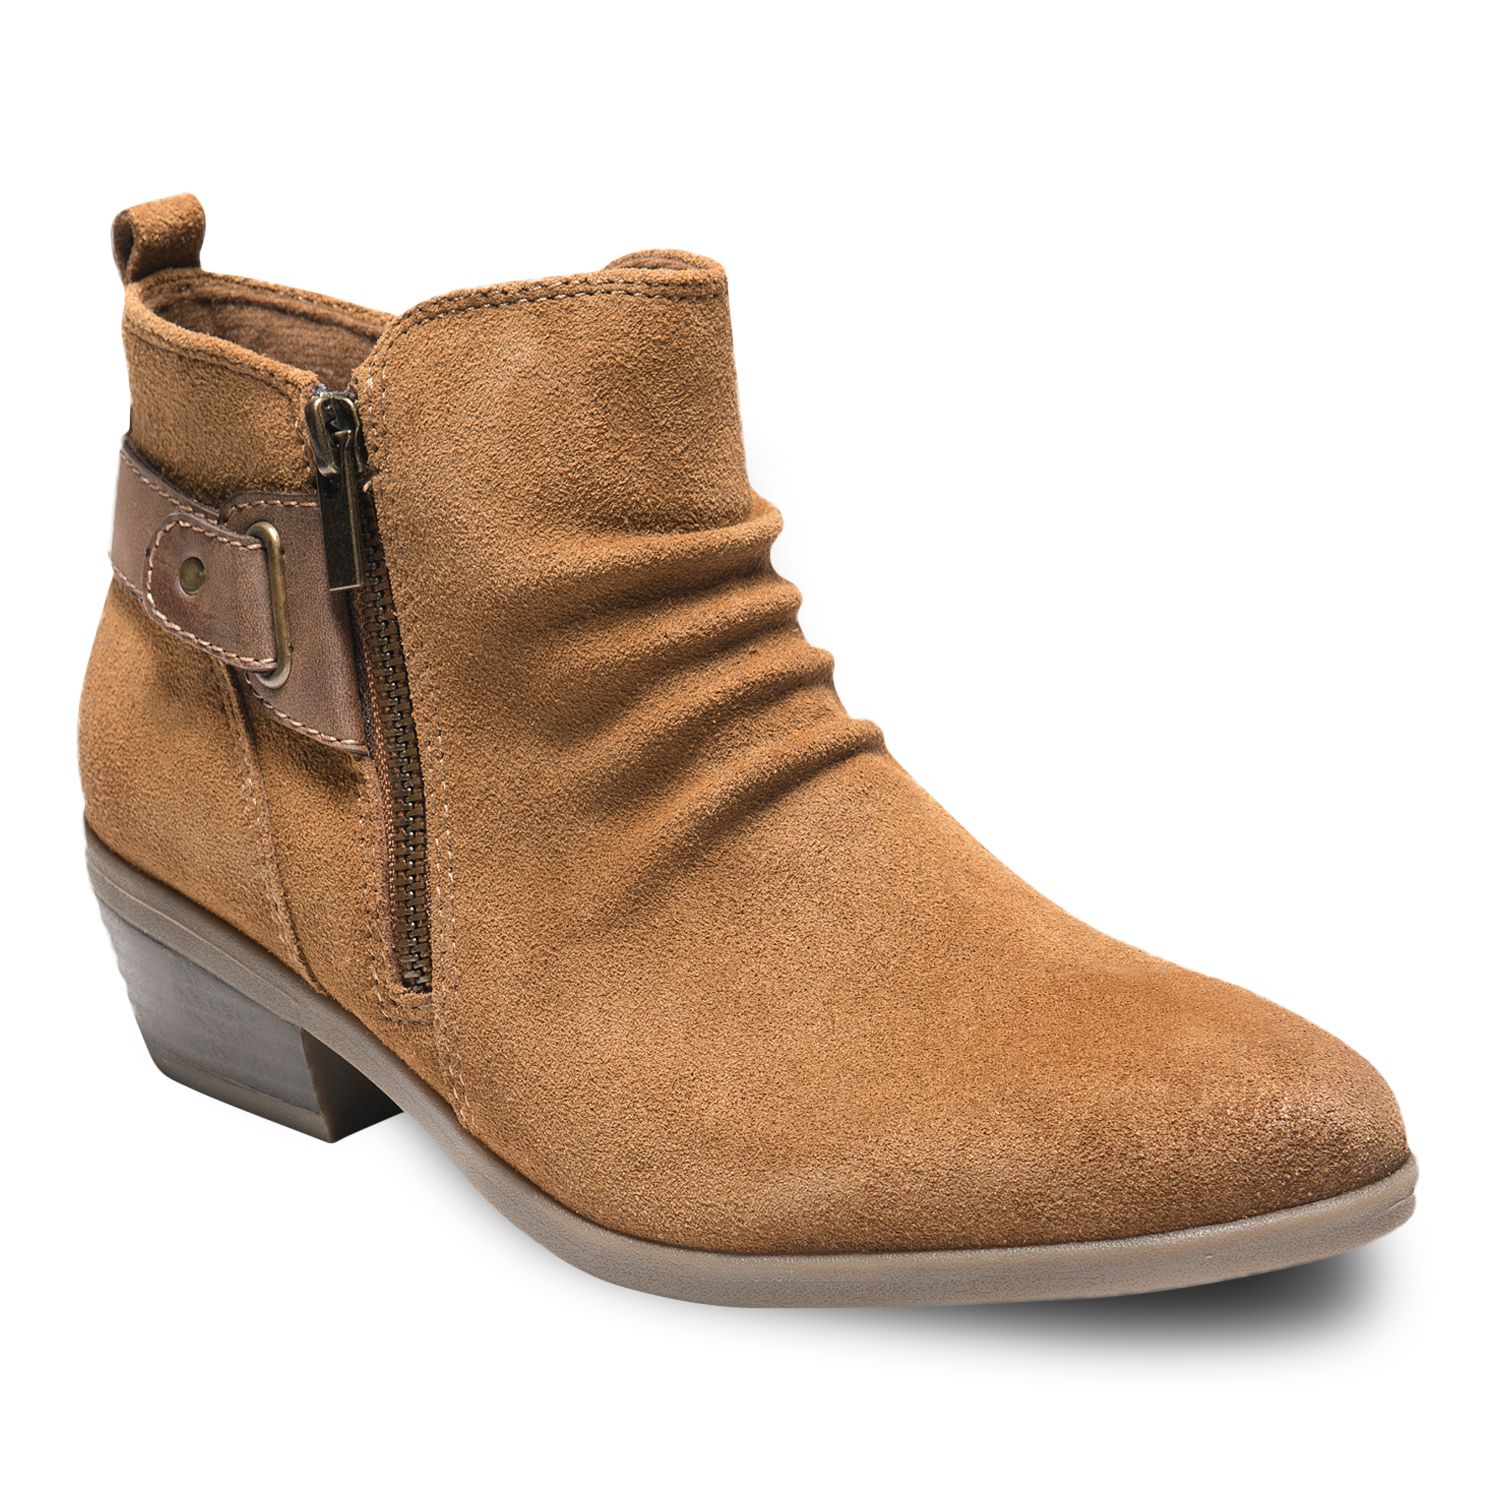 earth women's ankle boots